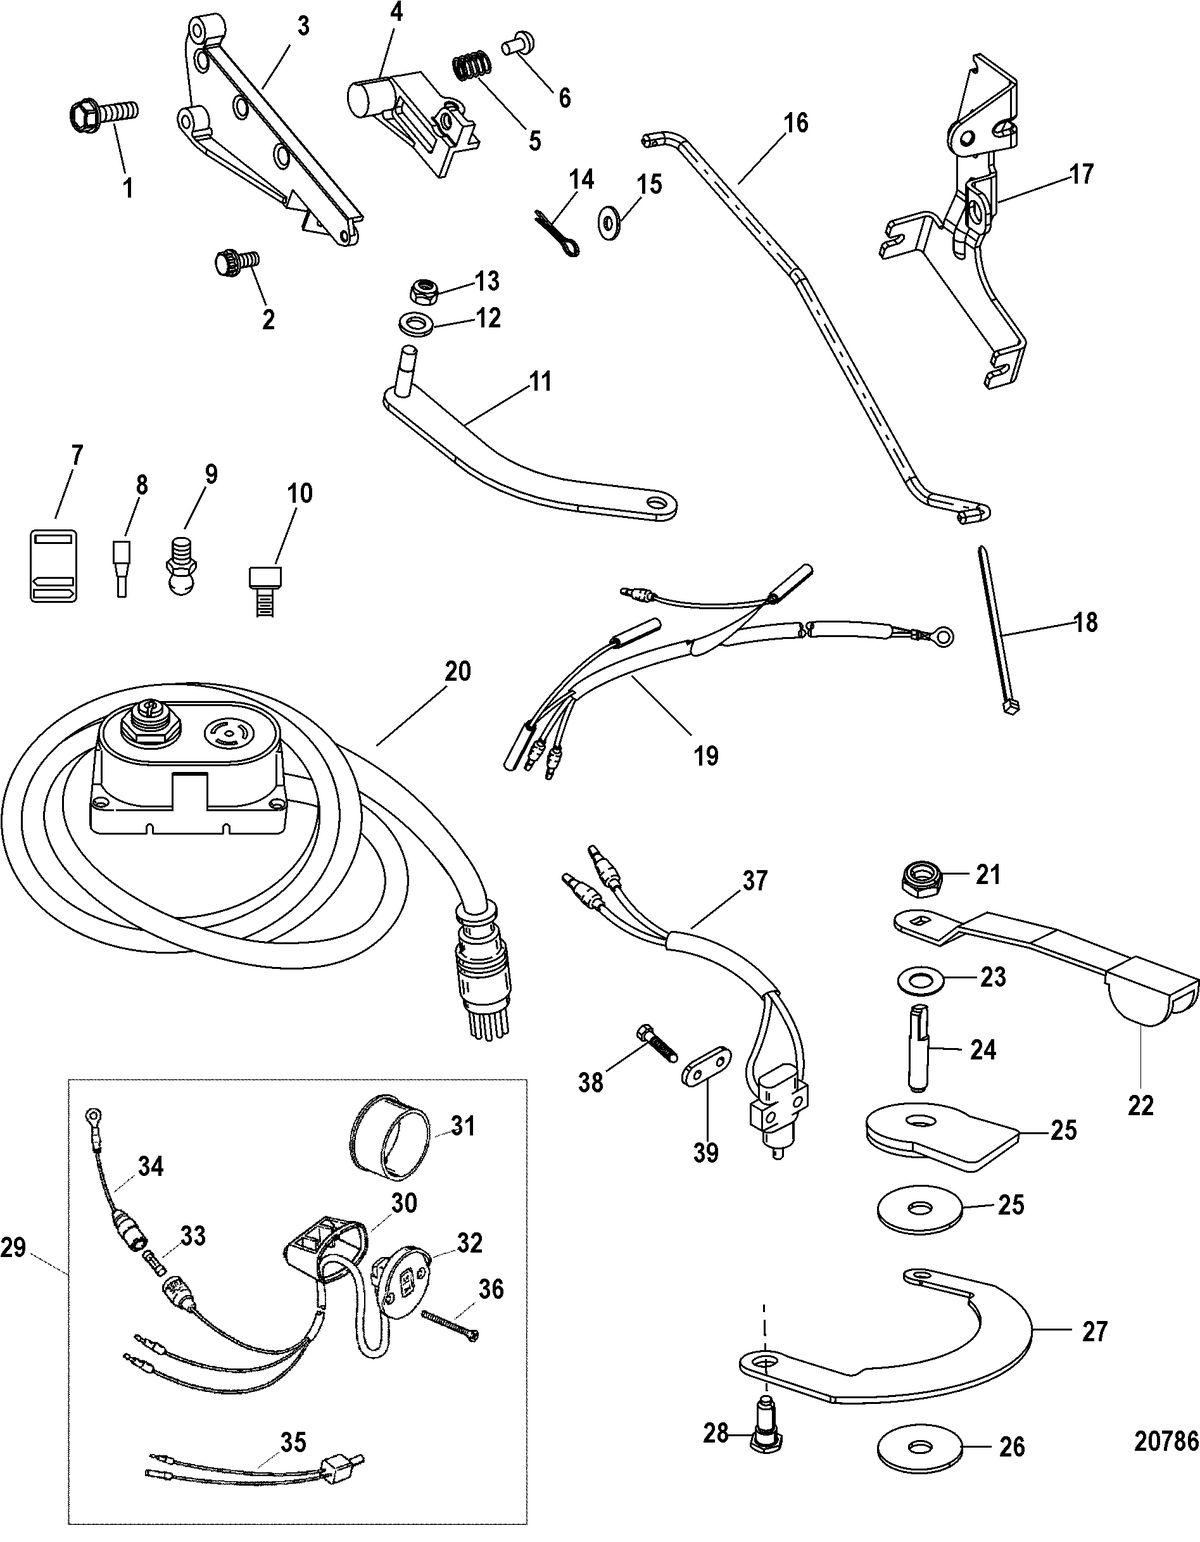 ACCESSORIES STEERING SYSTEMS AND COMPONENTS Tiller Handle Kit Components(880095A1/ A09)